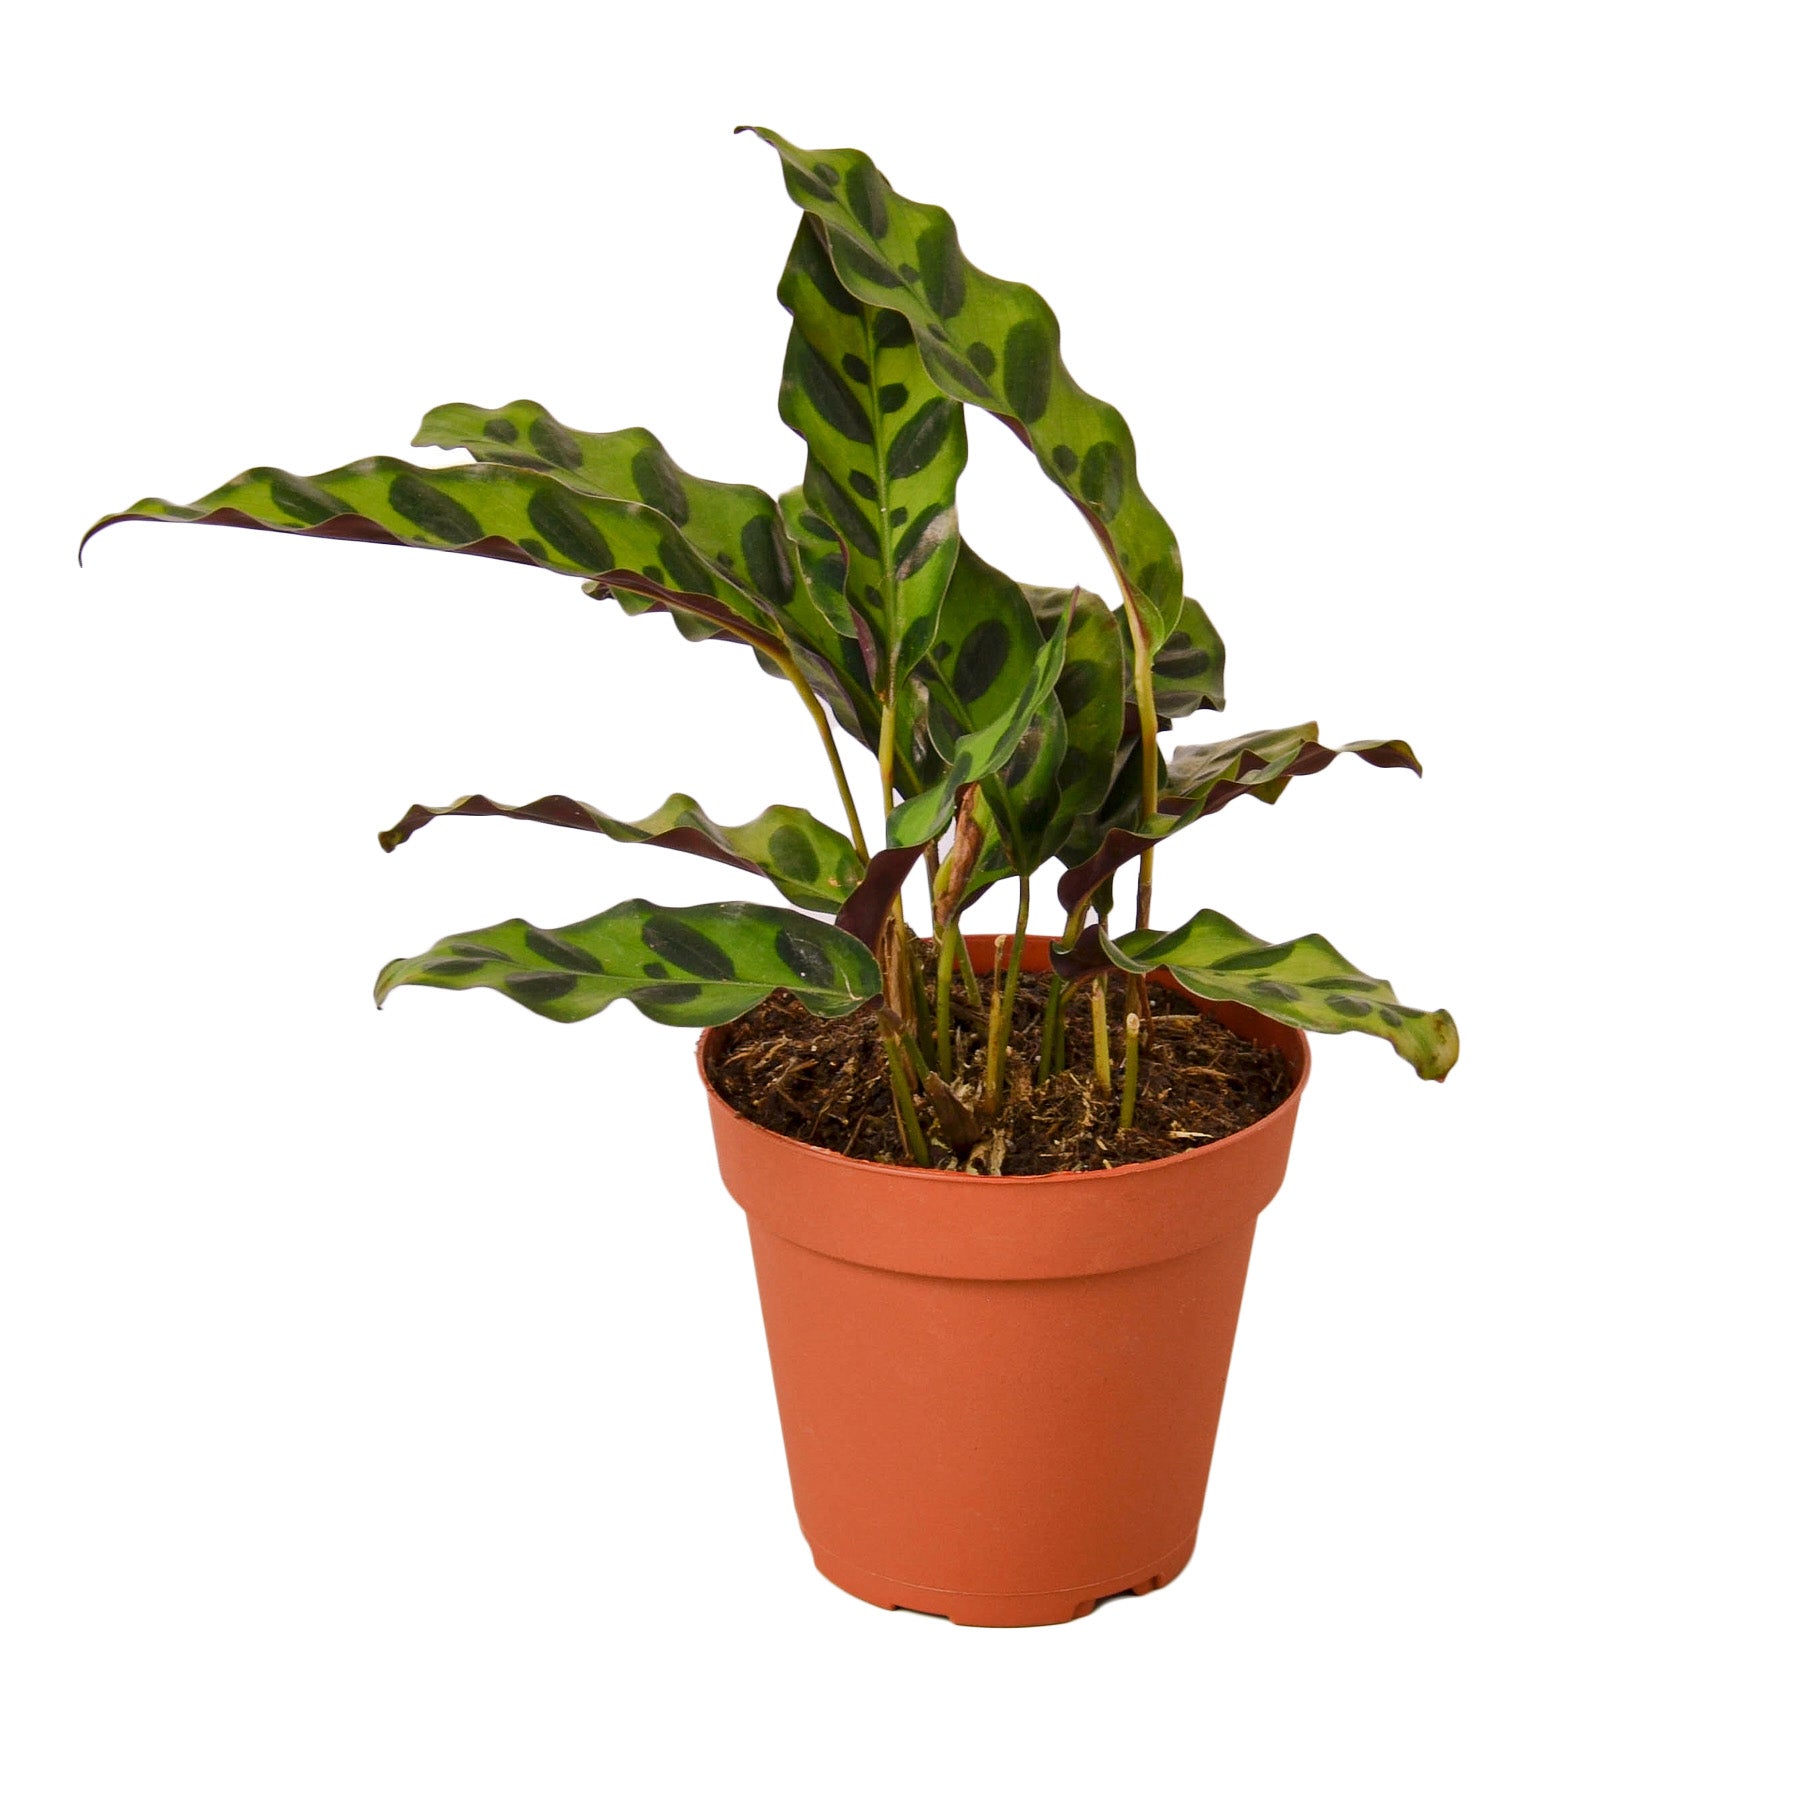 A potted plant on a white background.